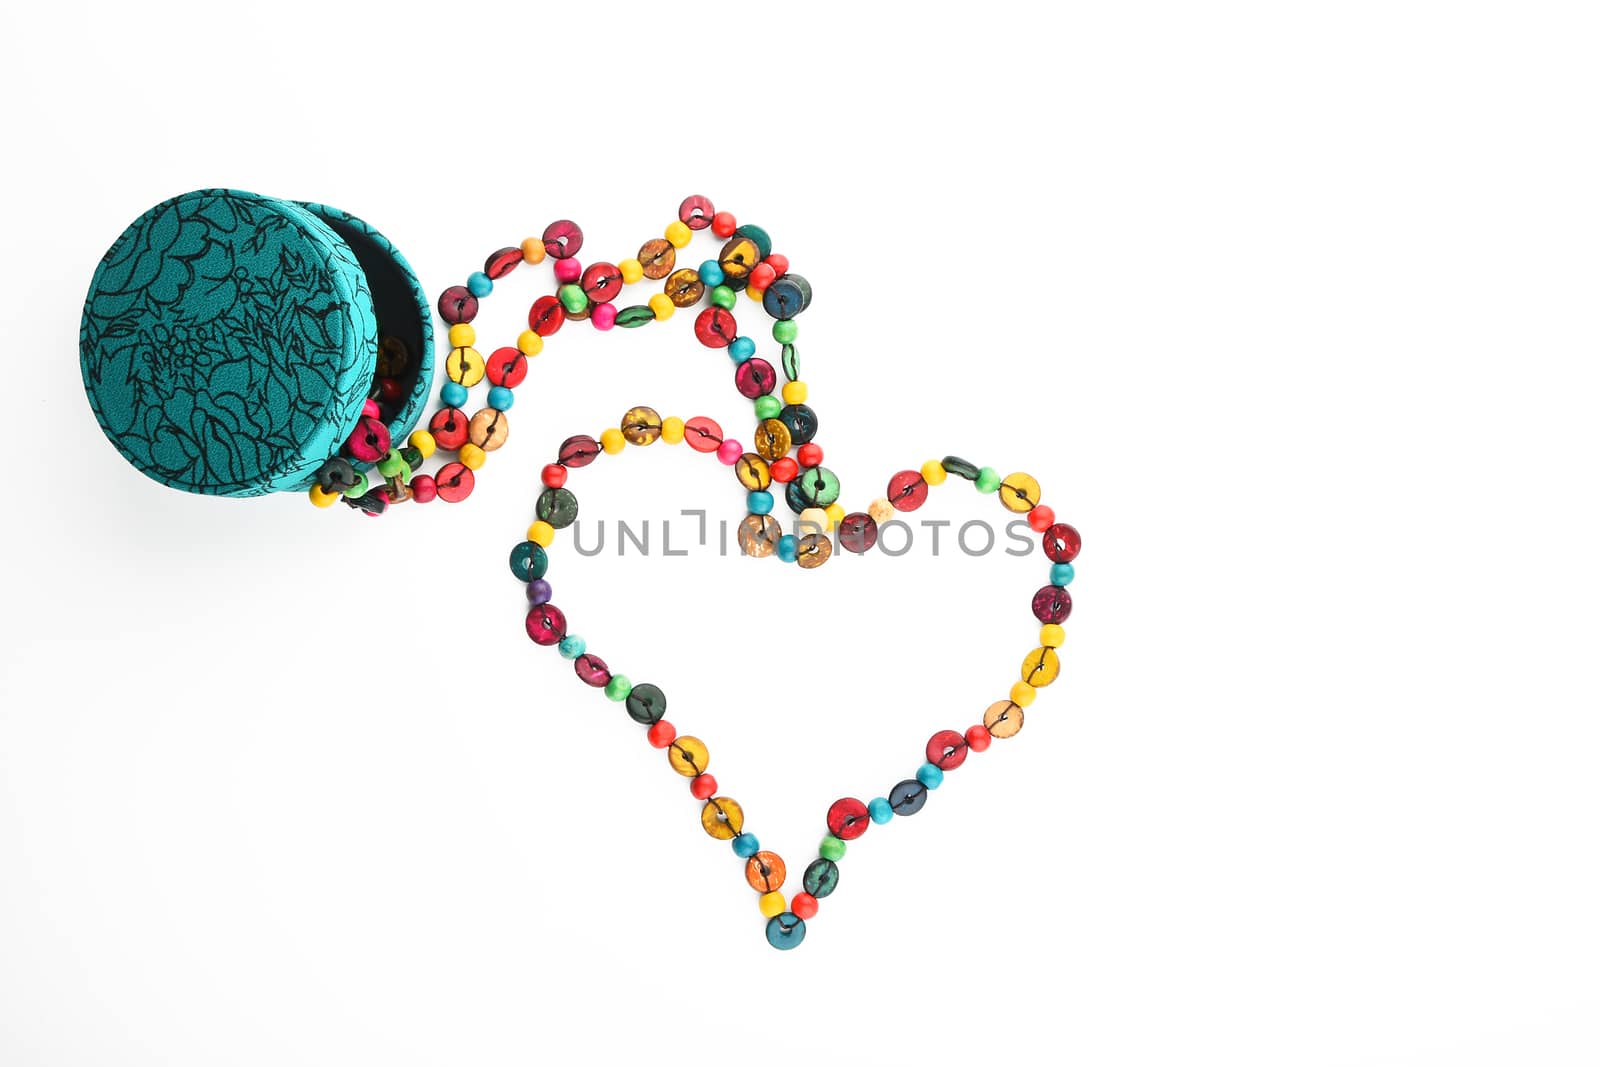 Heart shaped colorful handmade wooden round beads necklace partly taken out of jewelry box isolated on white